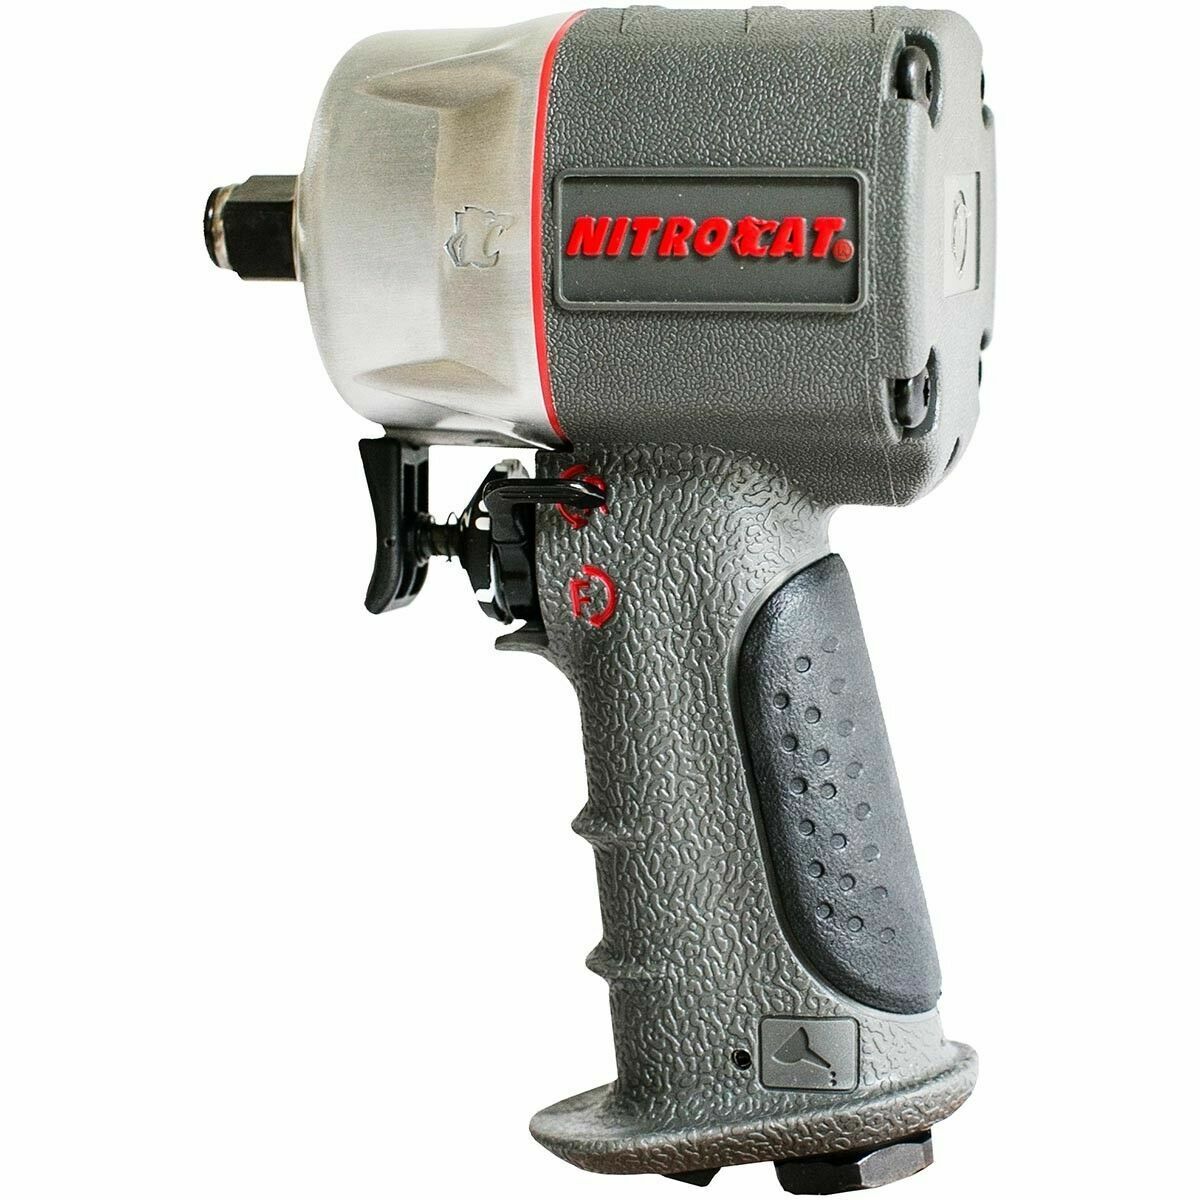 AirCat 1076-XL 3/8" Composite Compact Impact Wrench - New with Warranty!